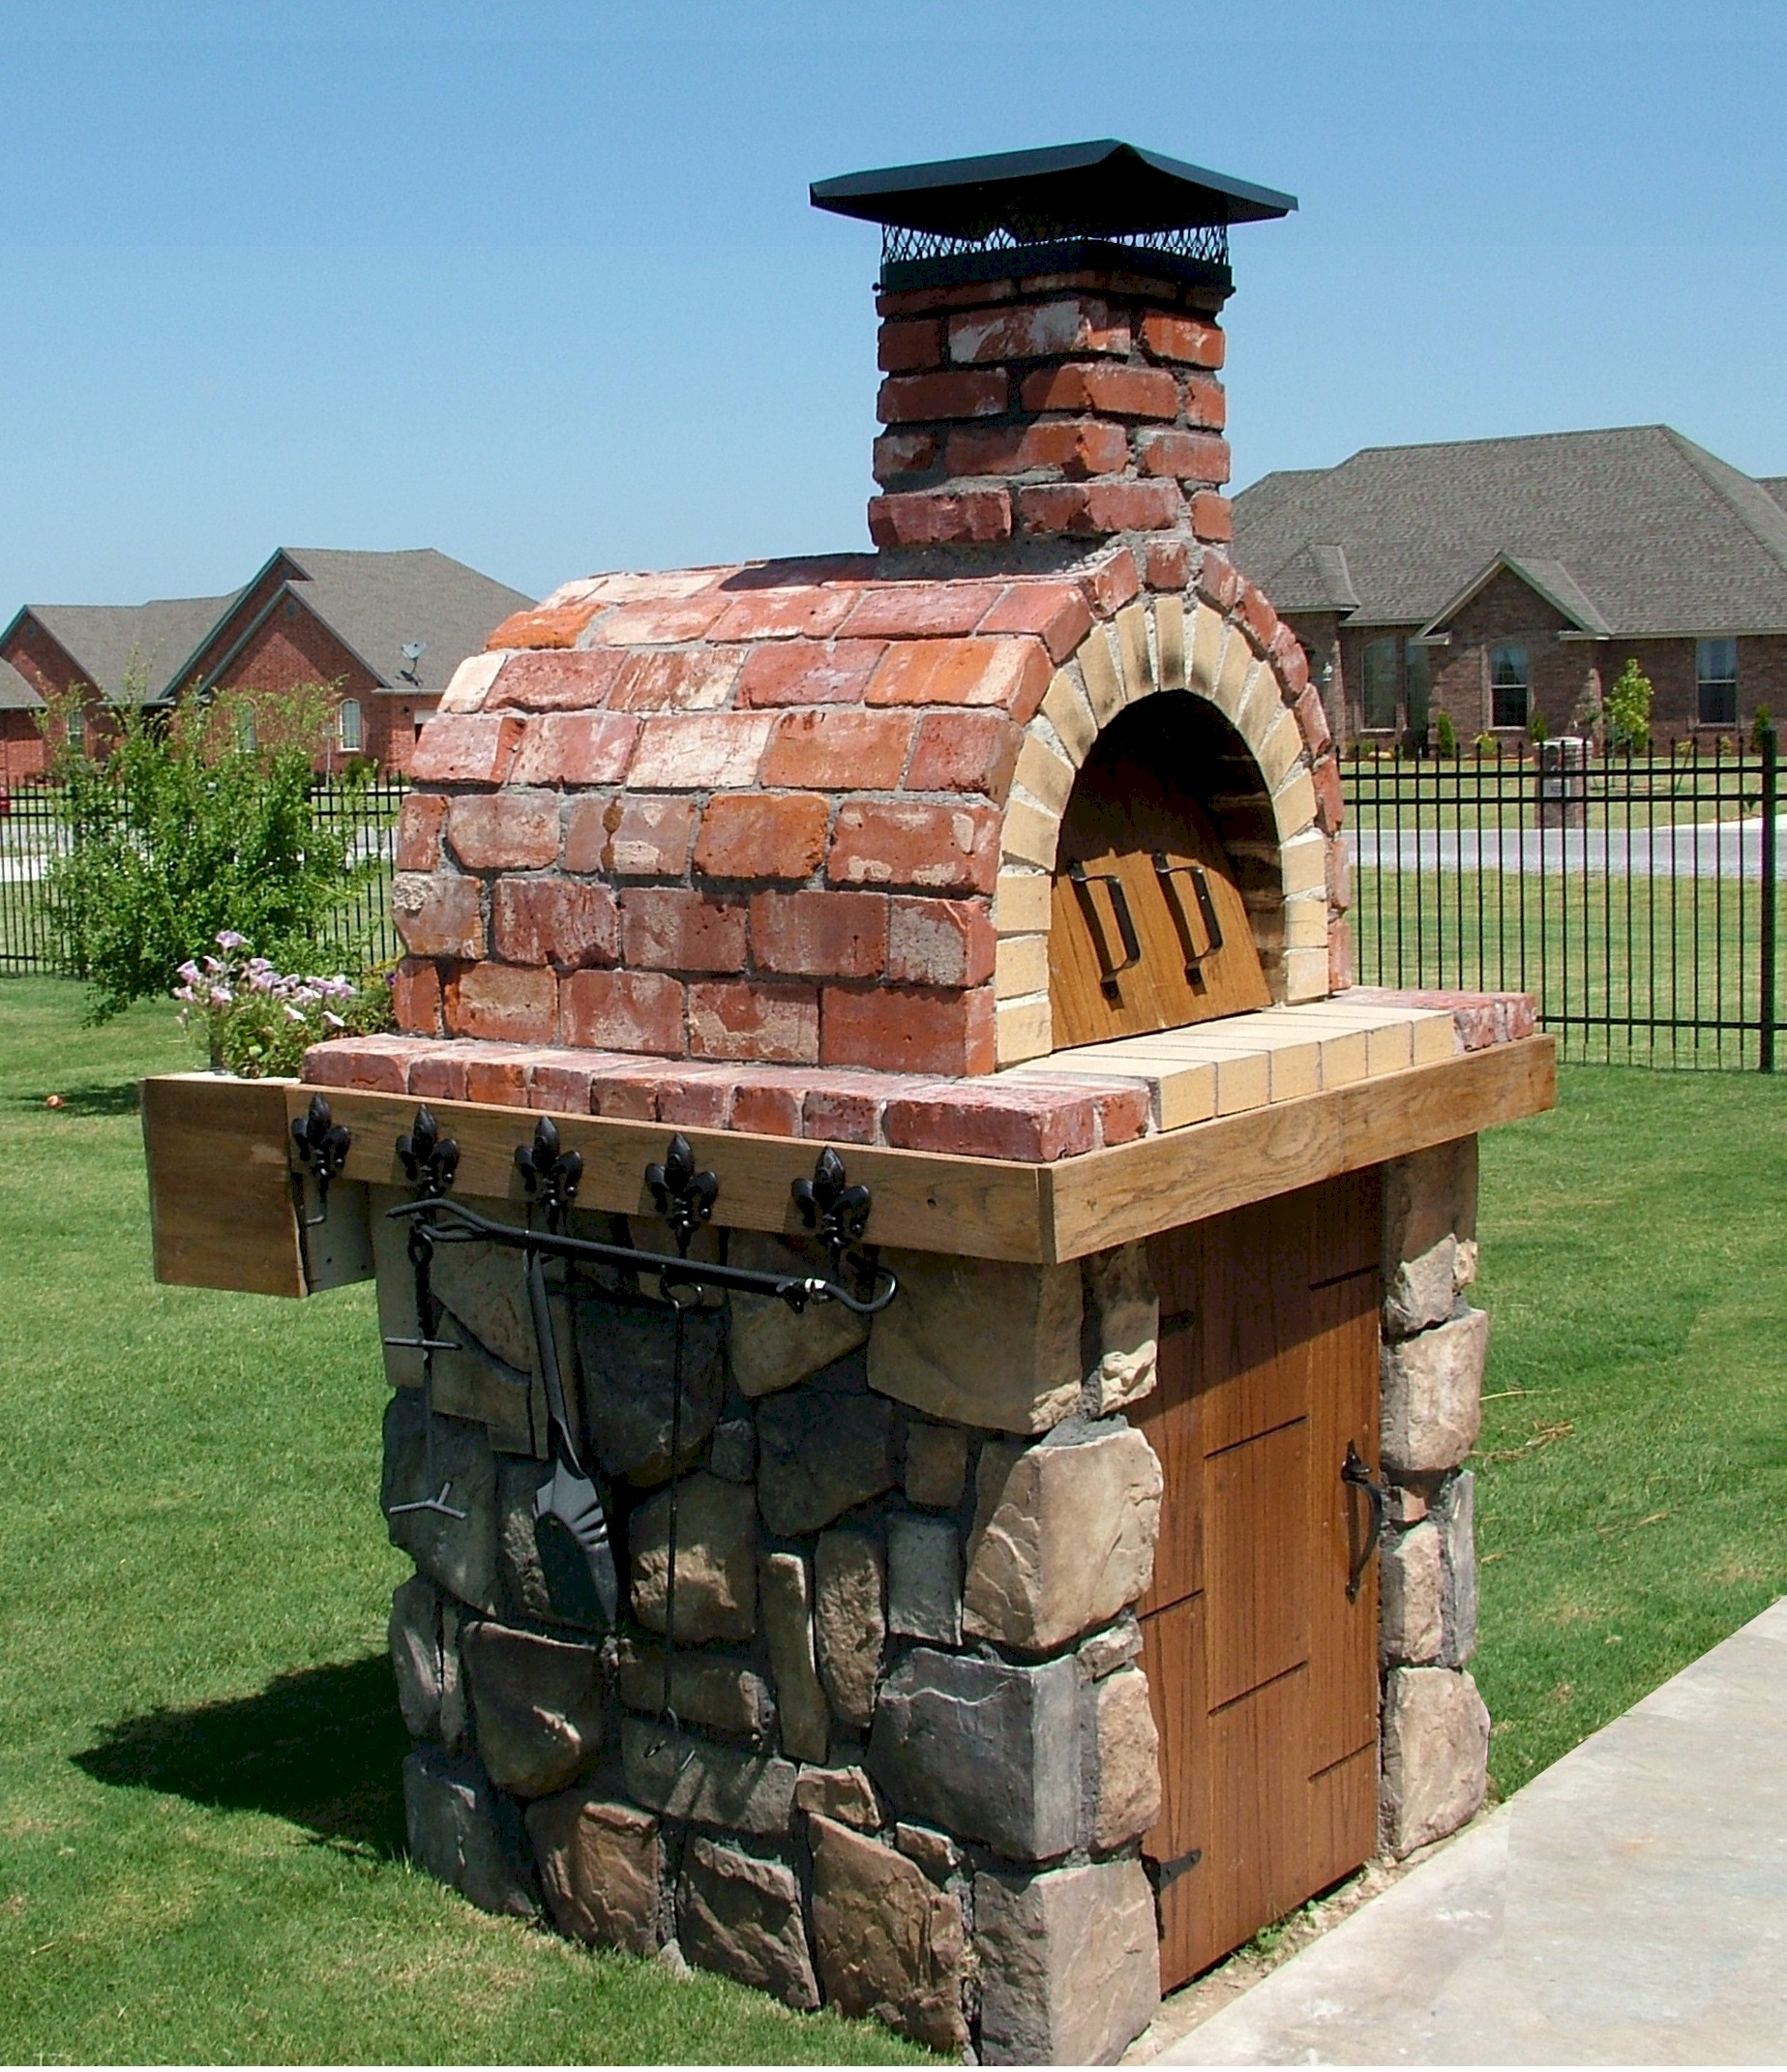 DIY Outdoor Oven
 DIY Wood Fired Outdoor Brick Pizza Ovens Are Not ly Easy